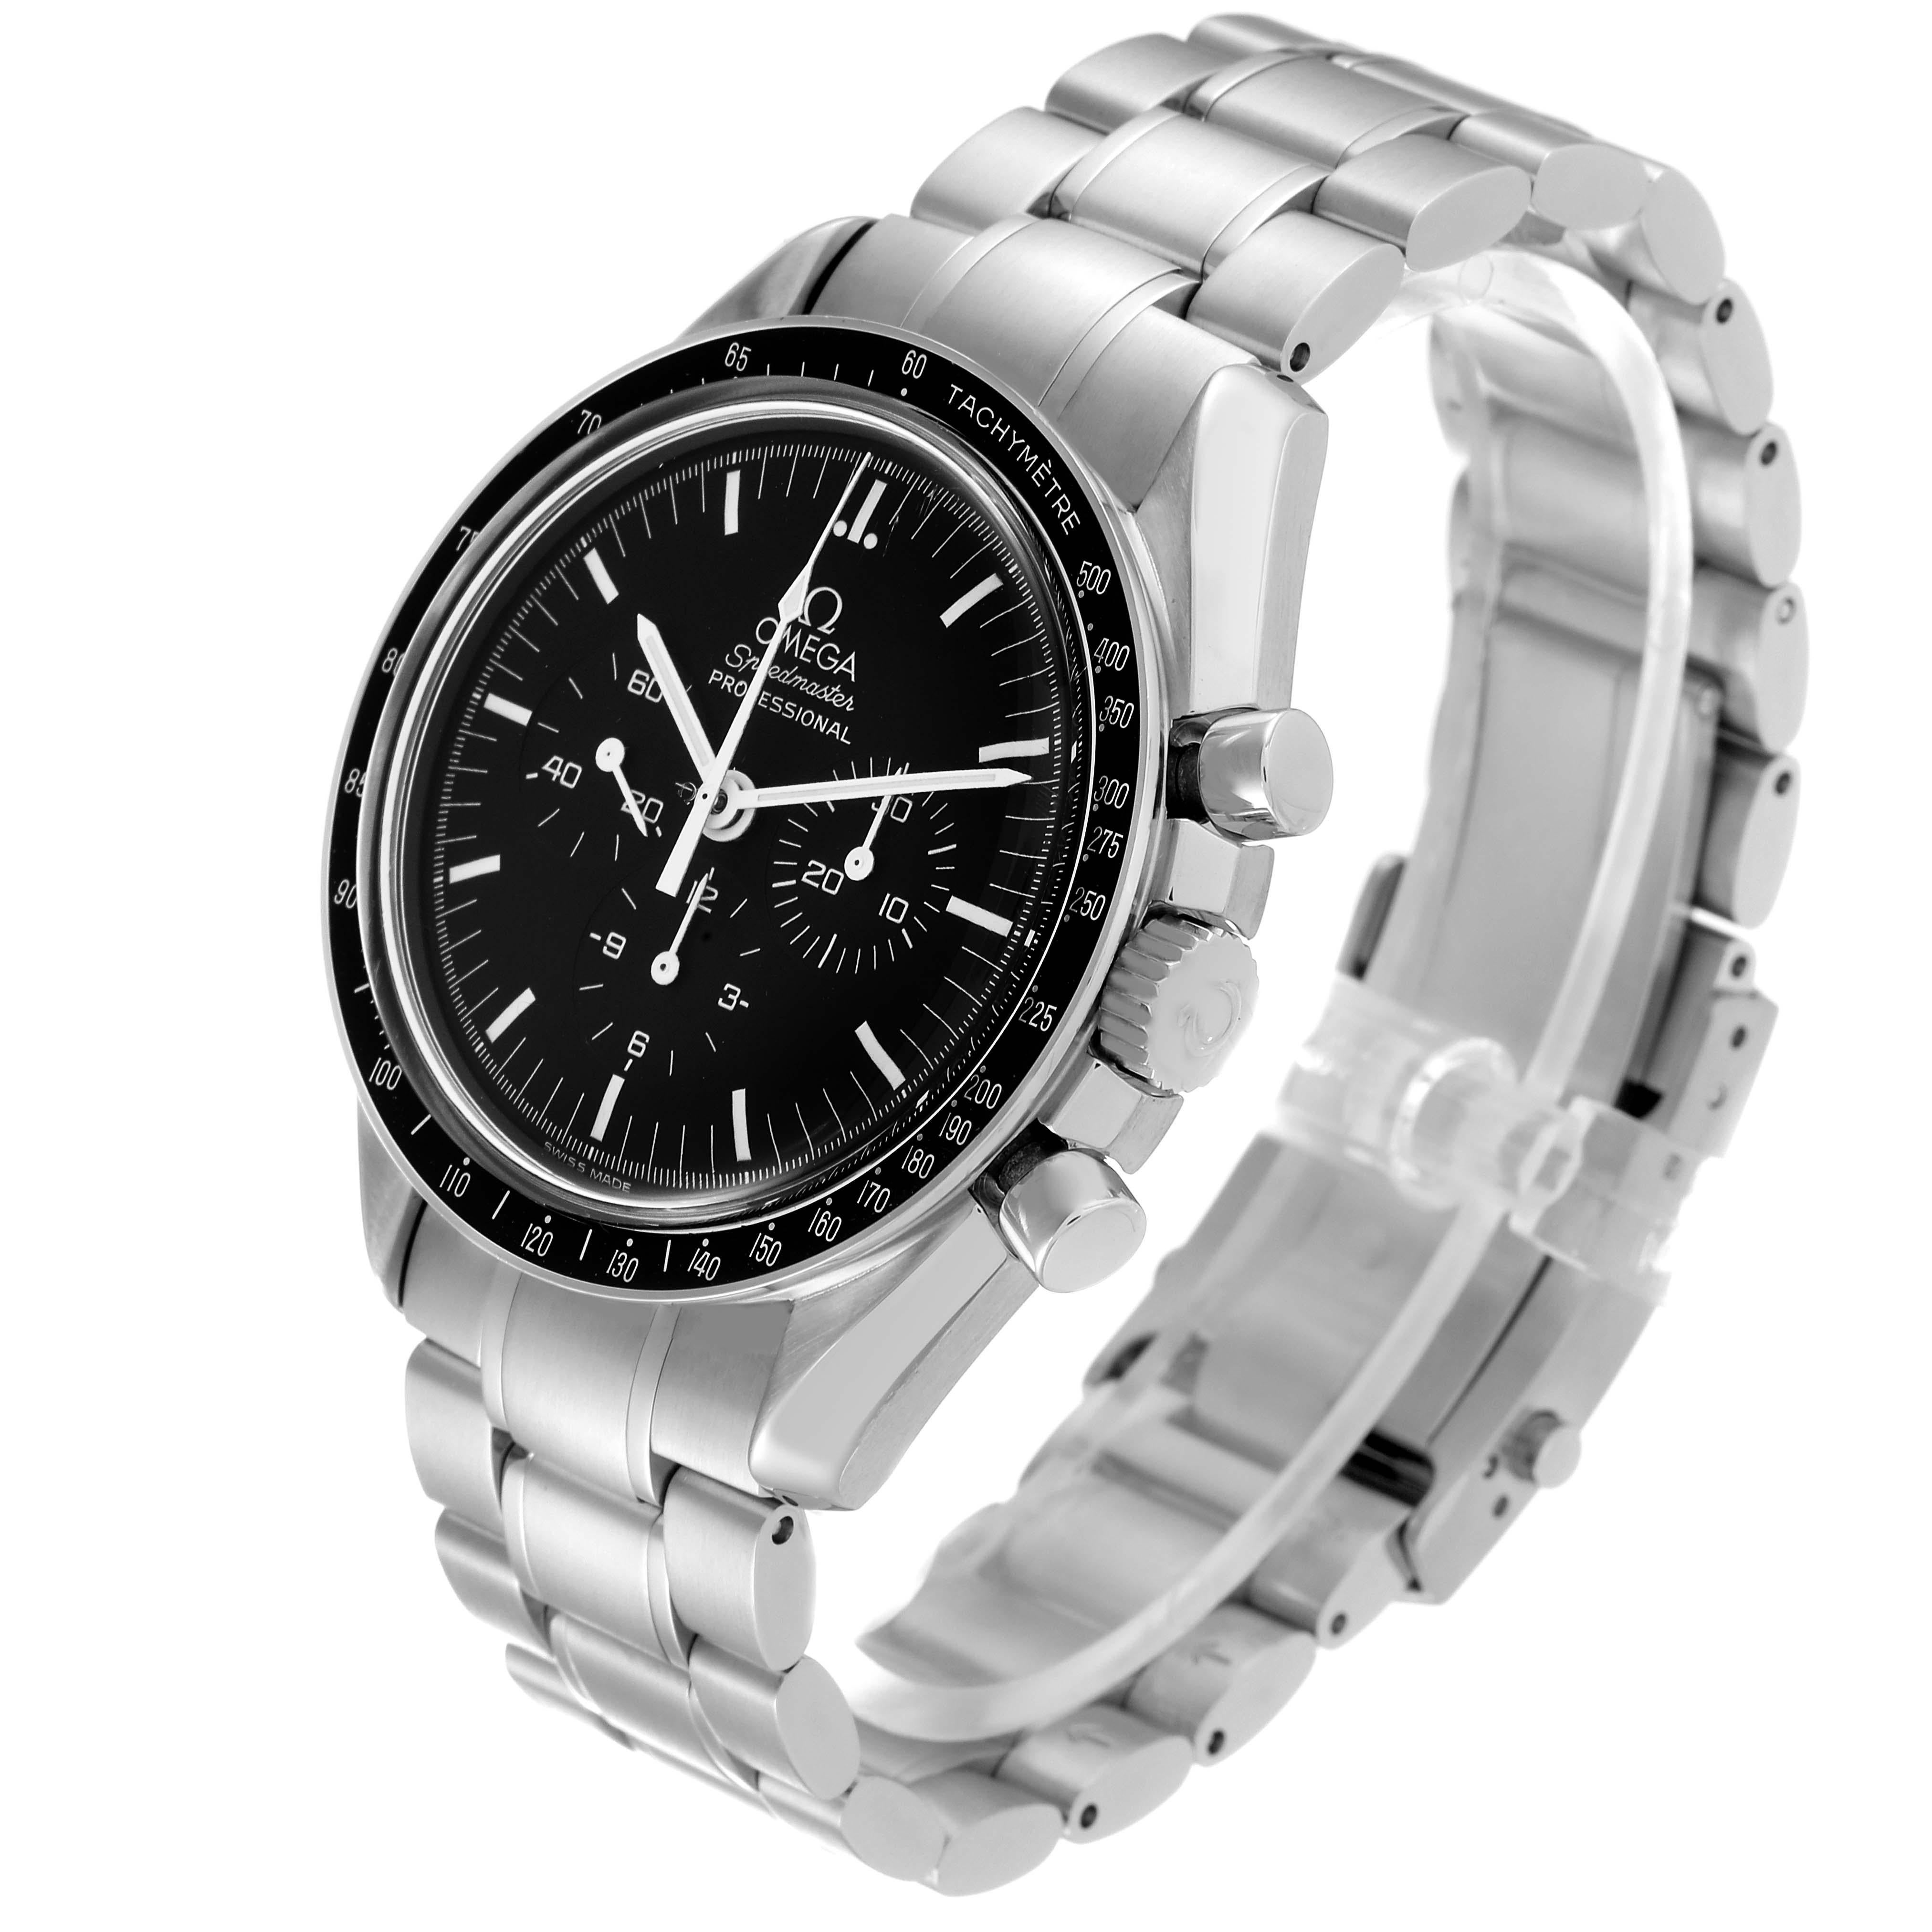 Omega Speedmaster MoonWatch Chronograph Steel Mens Watch 3570.50.00 Box Card For Sale 3